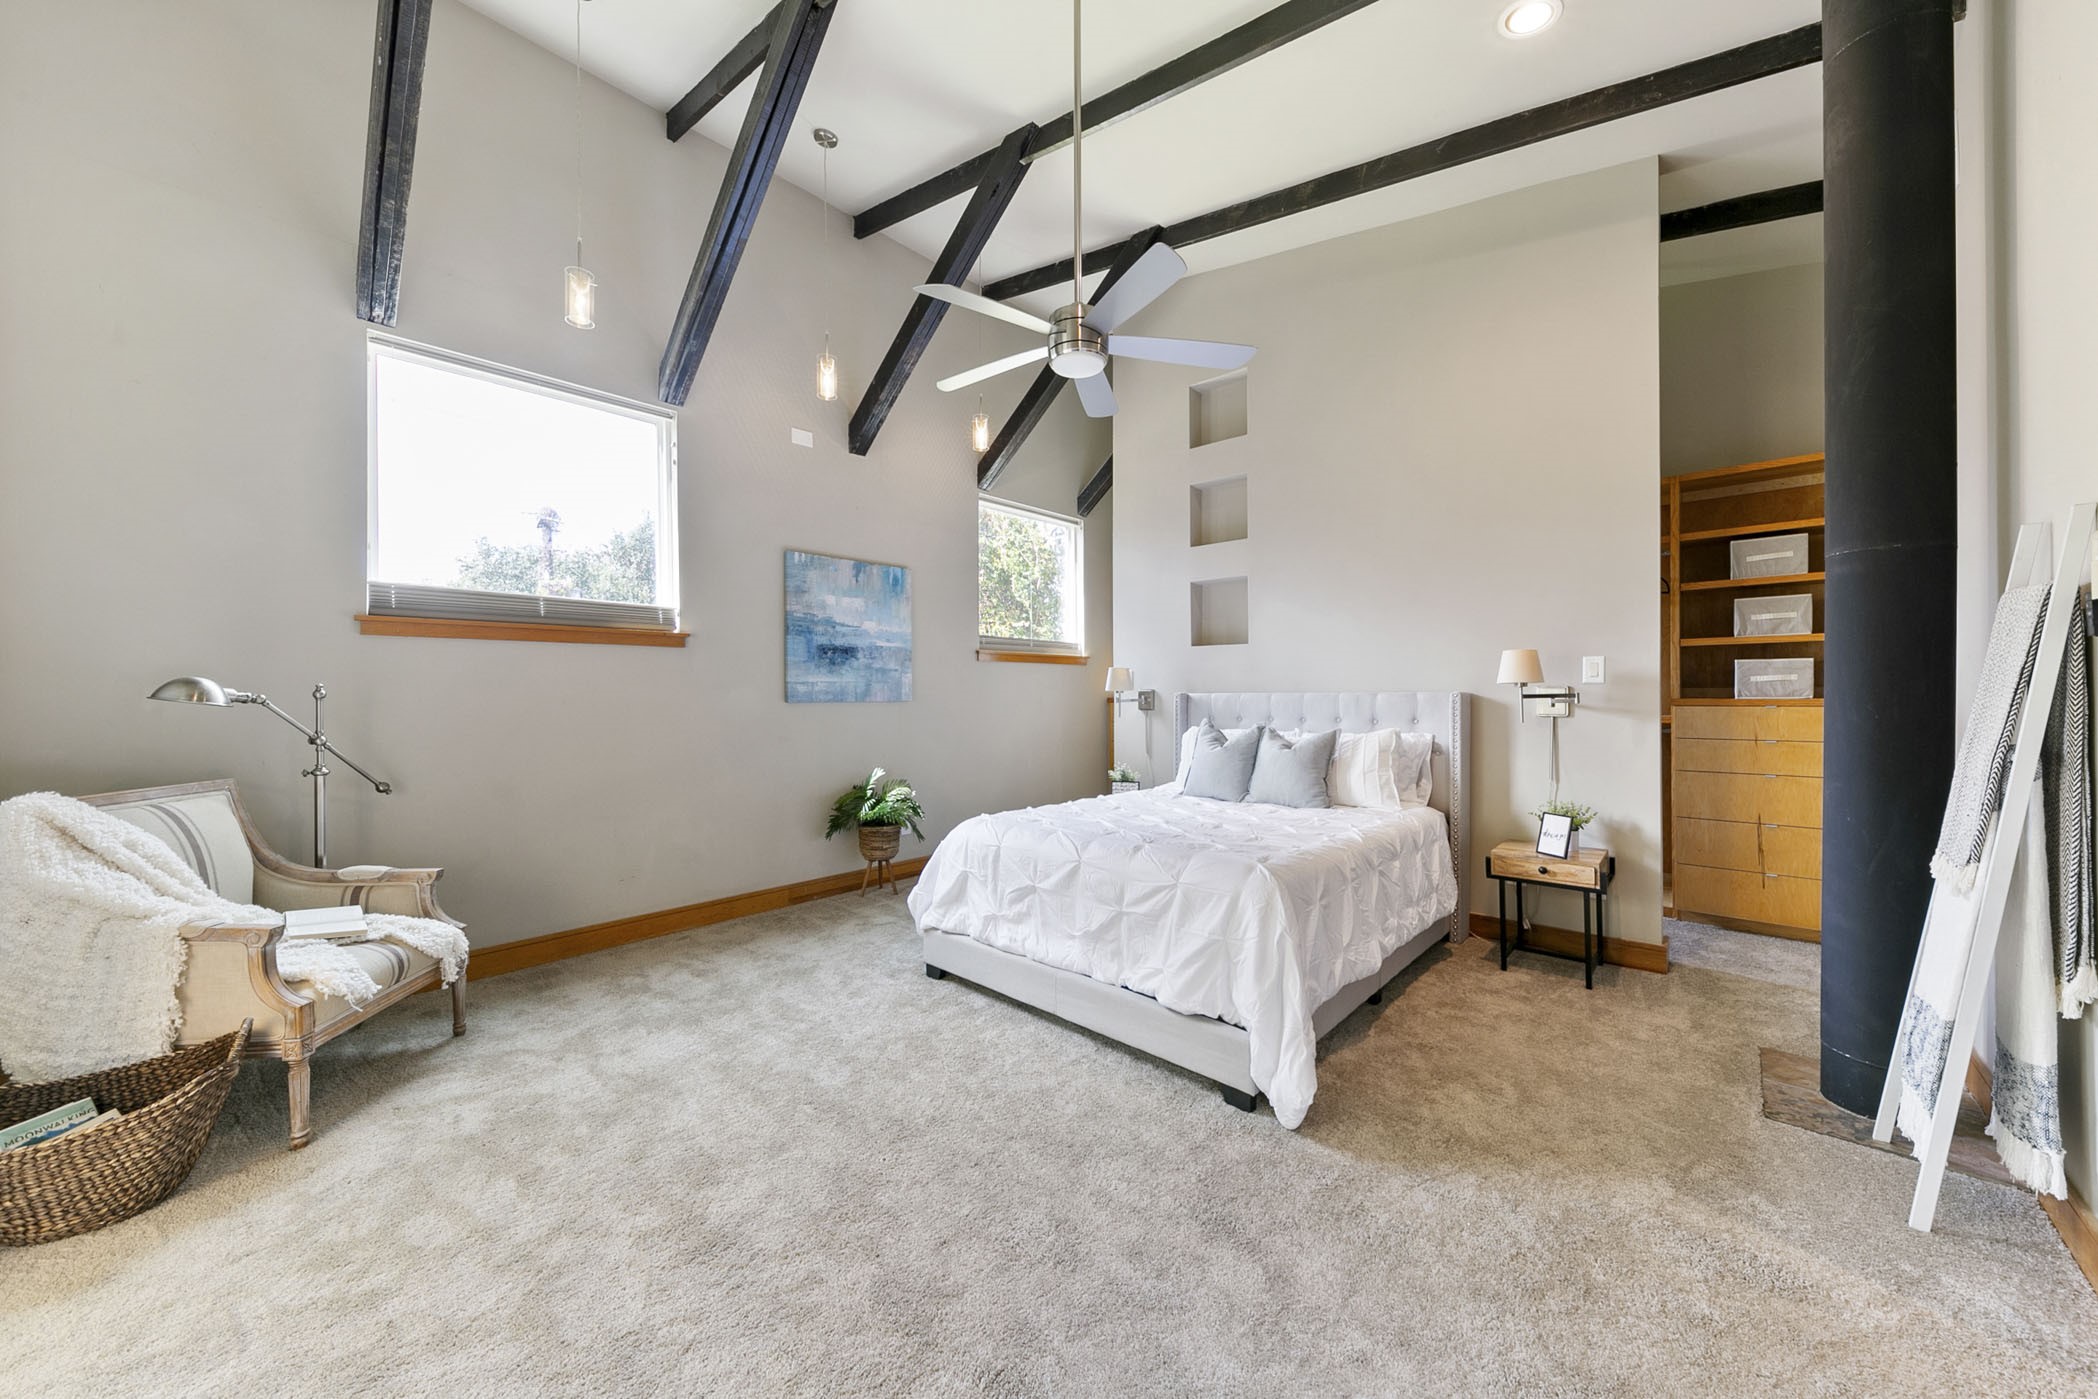 The tall ceilings and beams give this room a treehouse feel